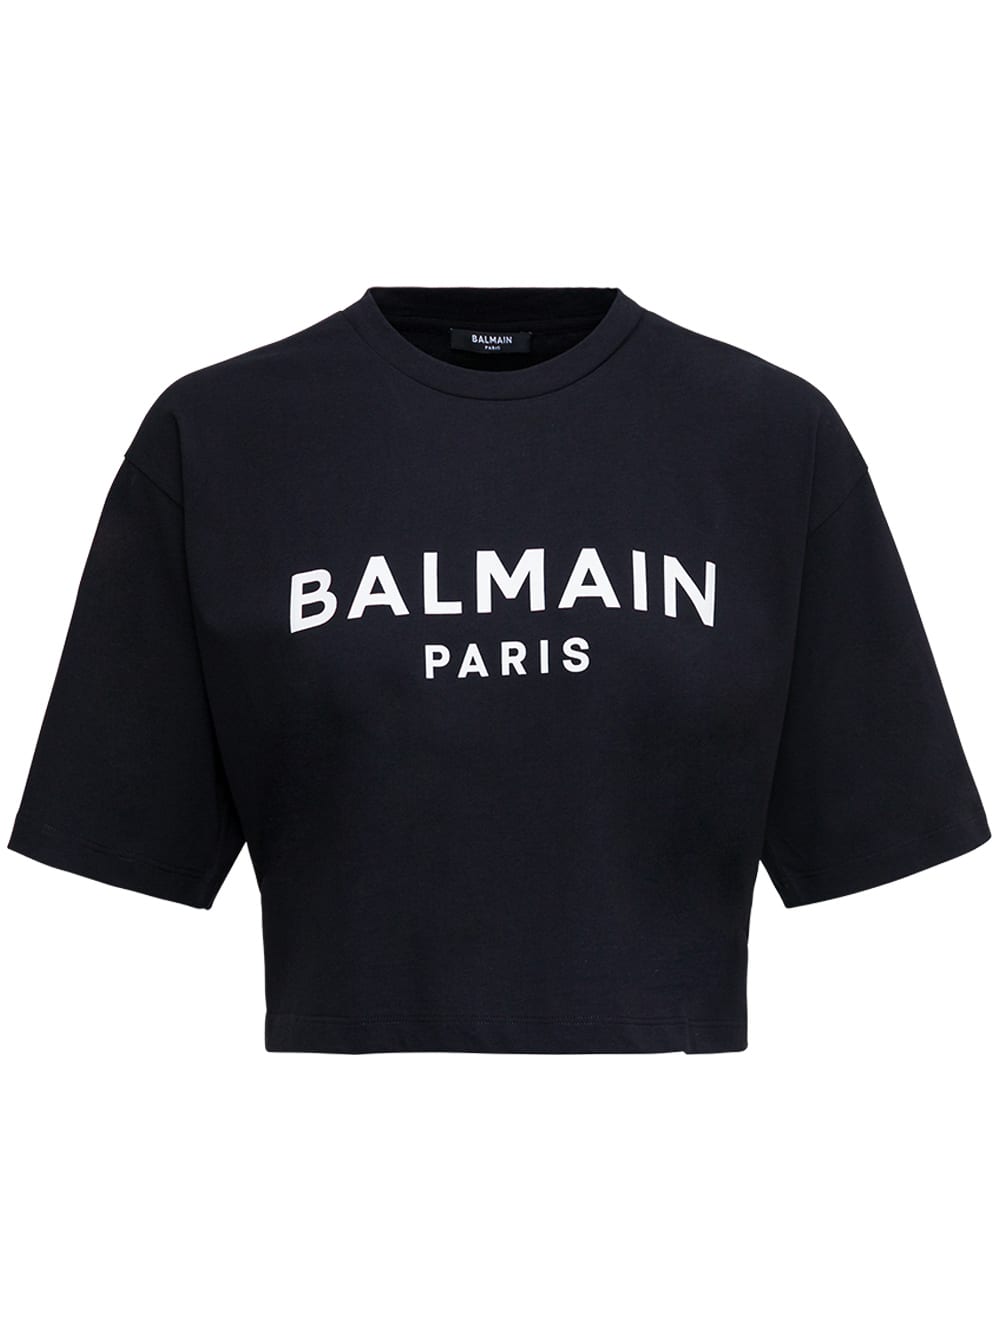 Balmain Black Crop T-shirt In Jersey With Contrasting Logo Print On Front